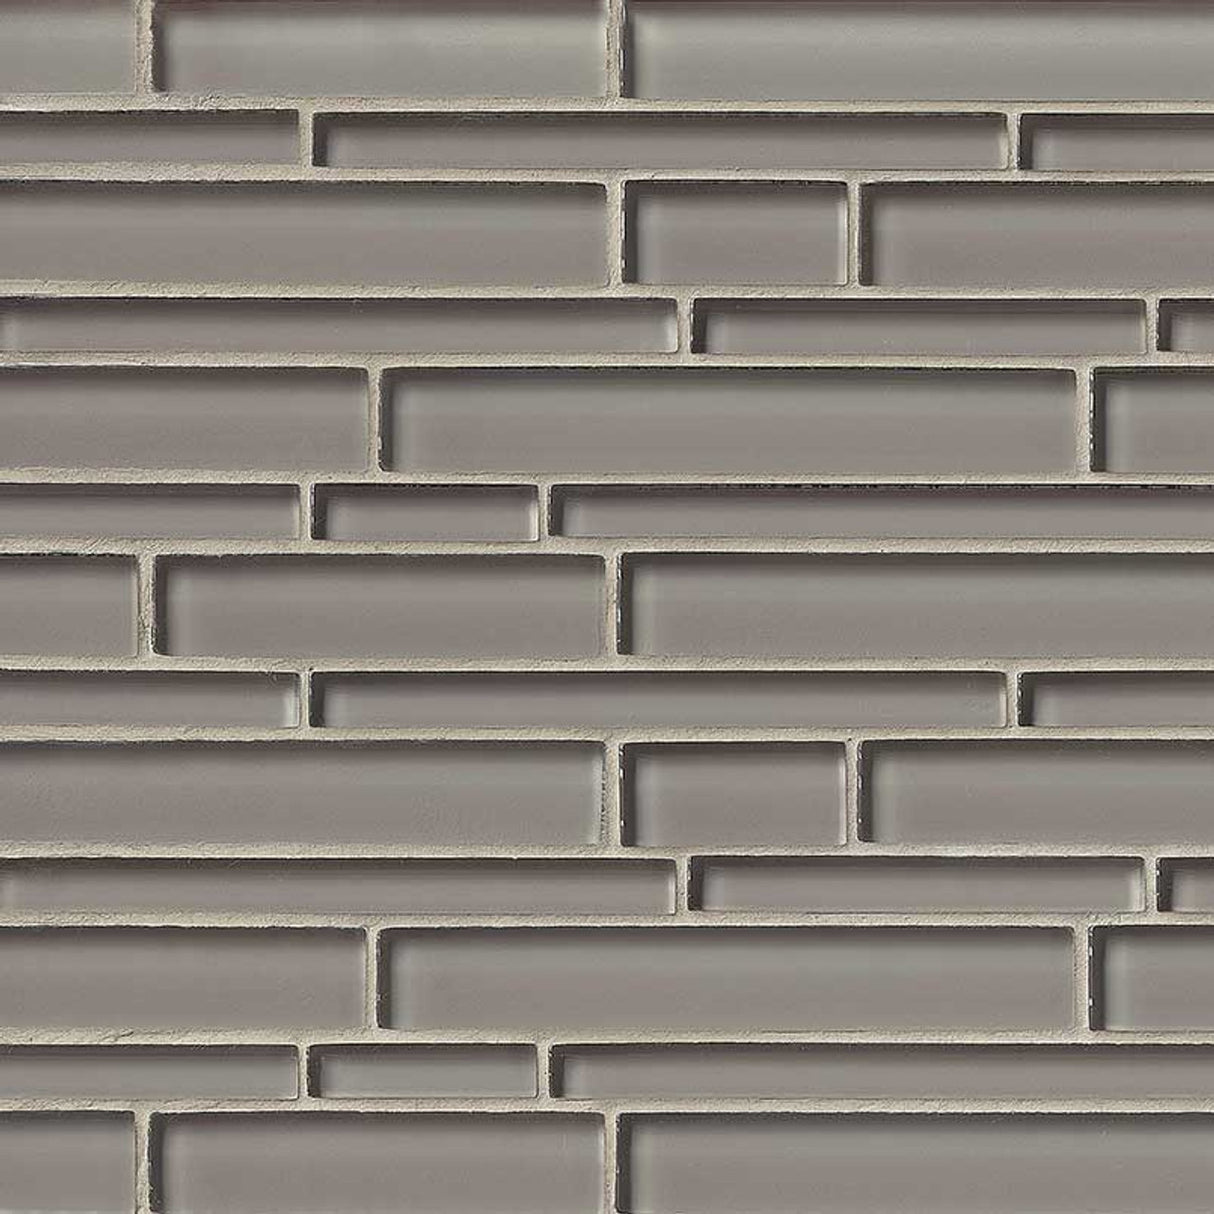 Pebble Interlocking 12"x13.25" Glossy Glass Patterned Look Wall Tile - MSI Collection product shot tile view